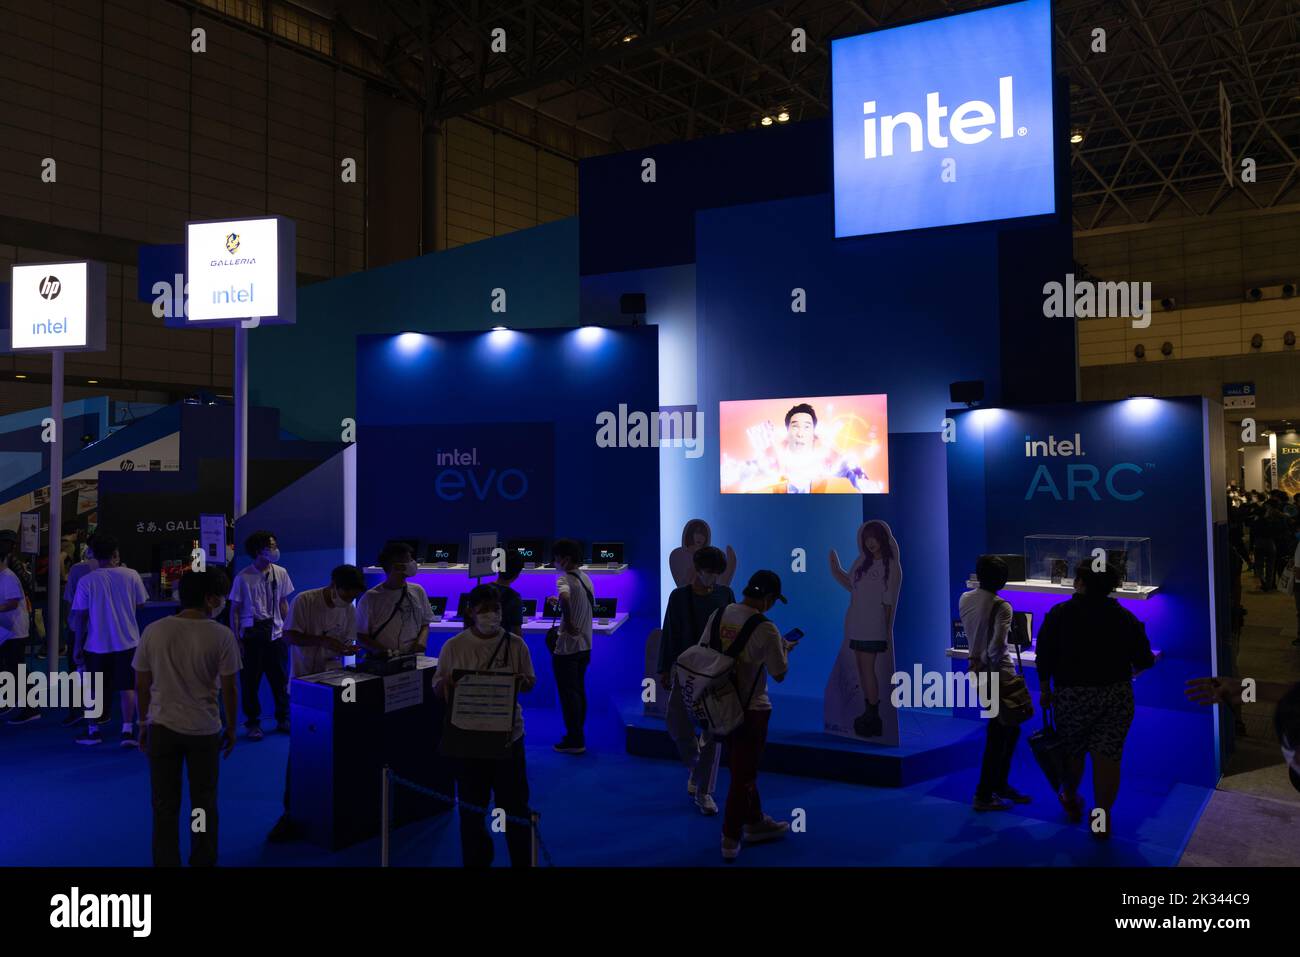 Intel (semiconductor manufacturing company) exhibition booth at Tokyo Game Show 2022. After a two years break forced by the Covid-19 pandemic, the Tokyo Game Show returned to Makuhari Messe in Chiba, Japan. Stock Photo